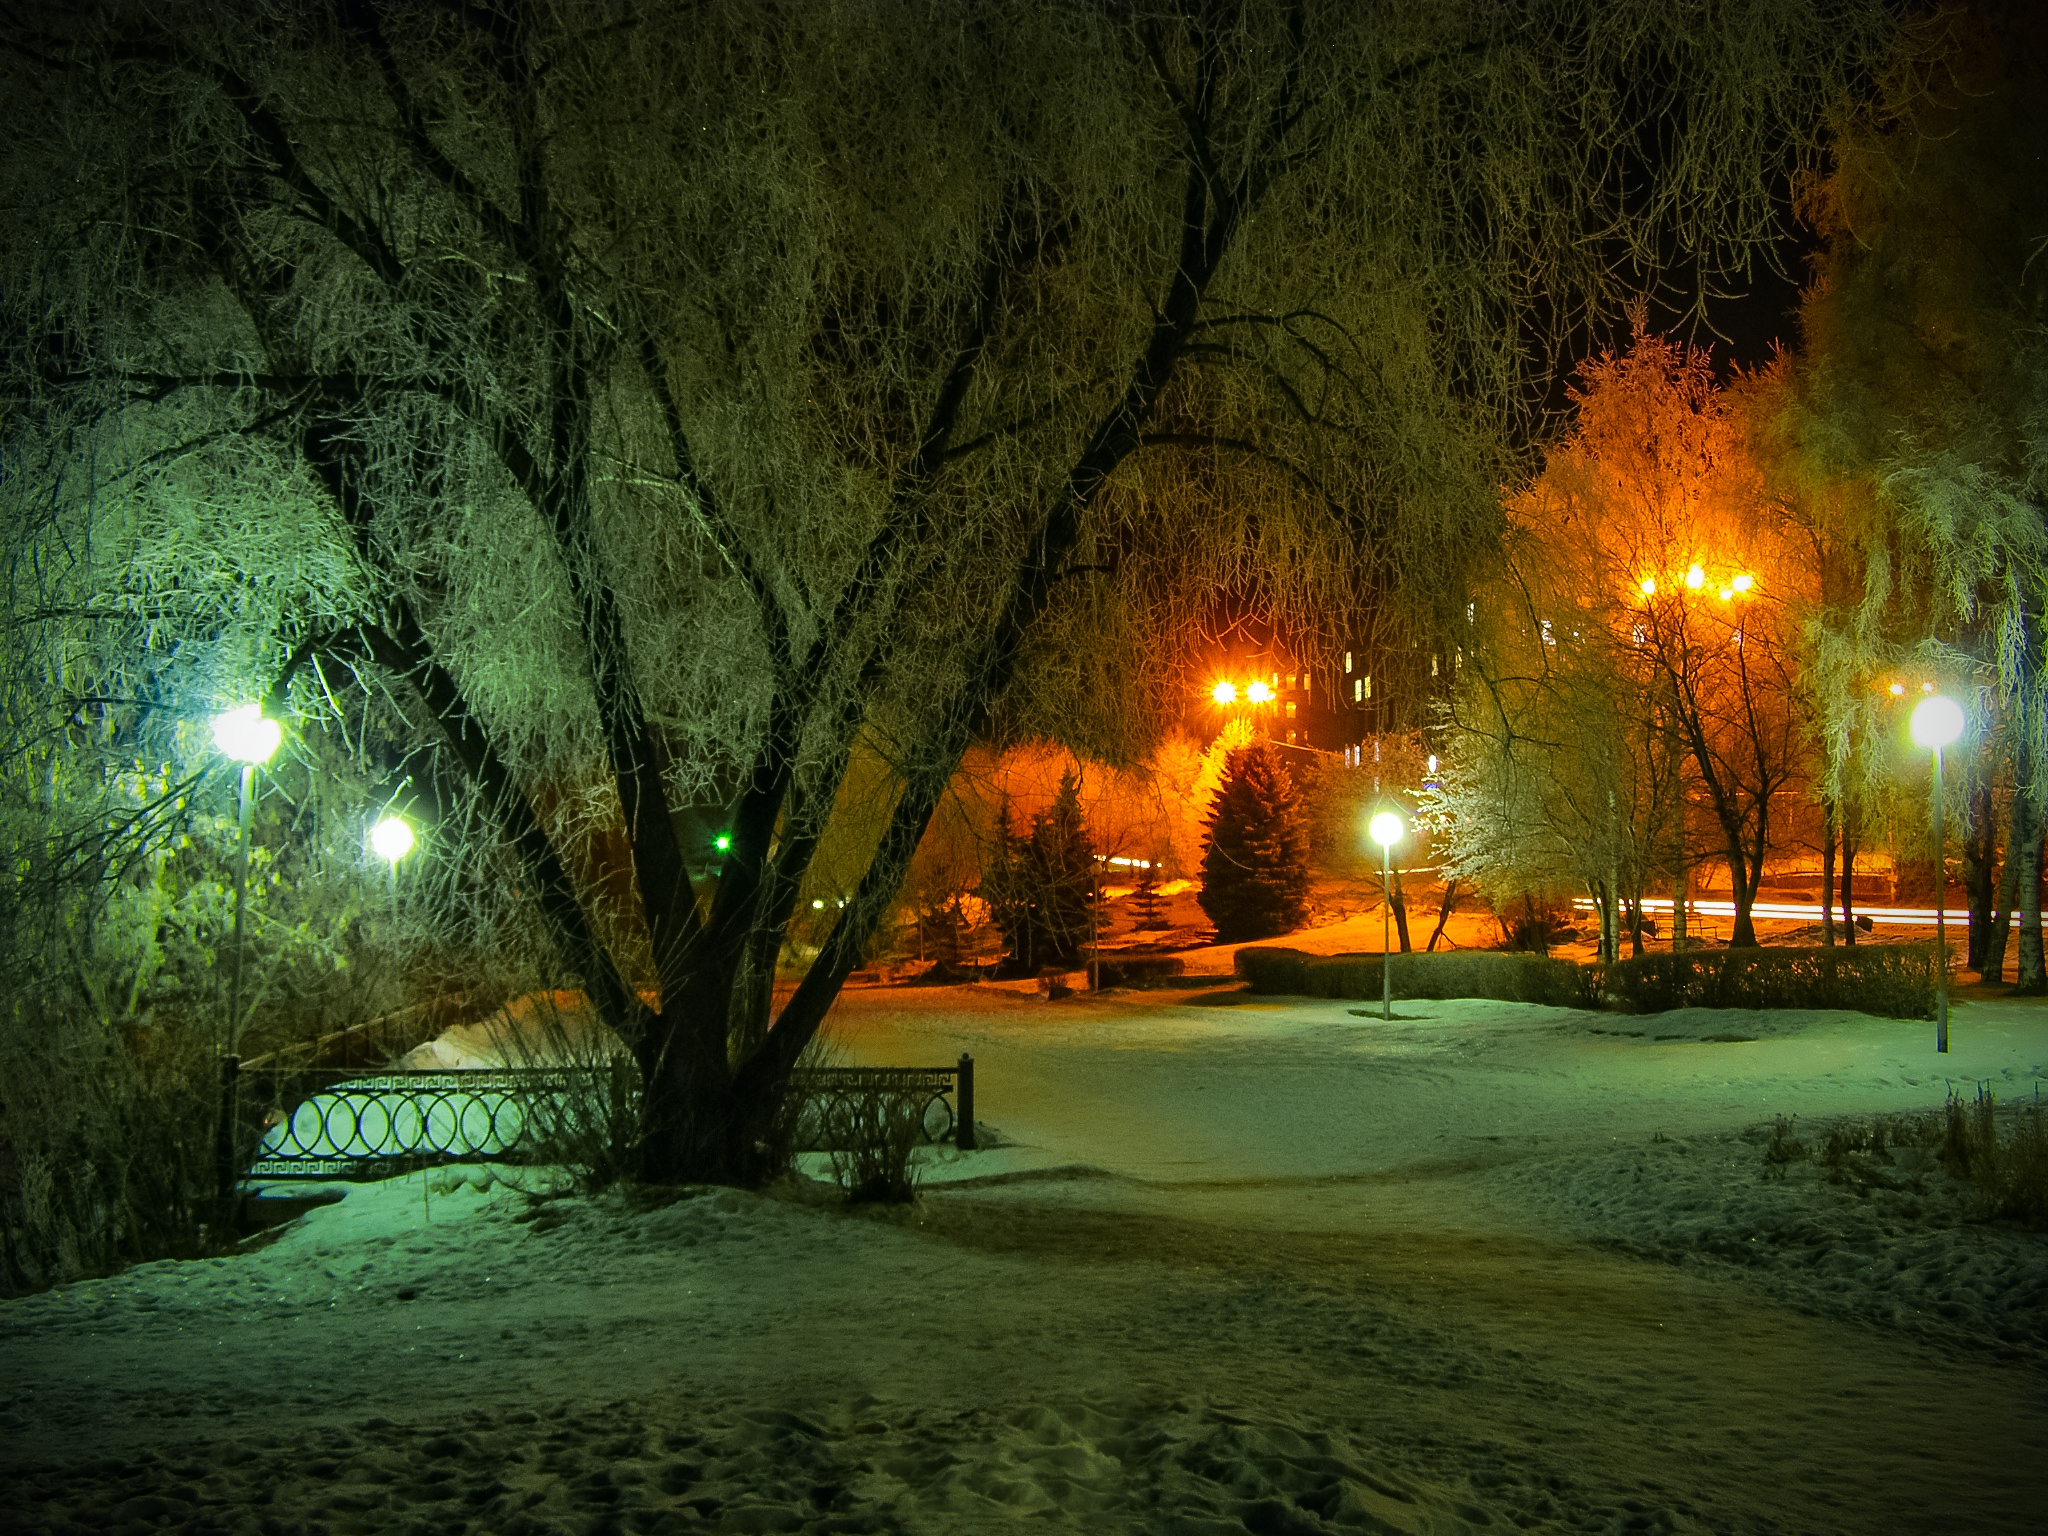 HD desktop wallpaper: Winter, Night, Light, Park, Tree, Earth, Photography  download free picture #771705